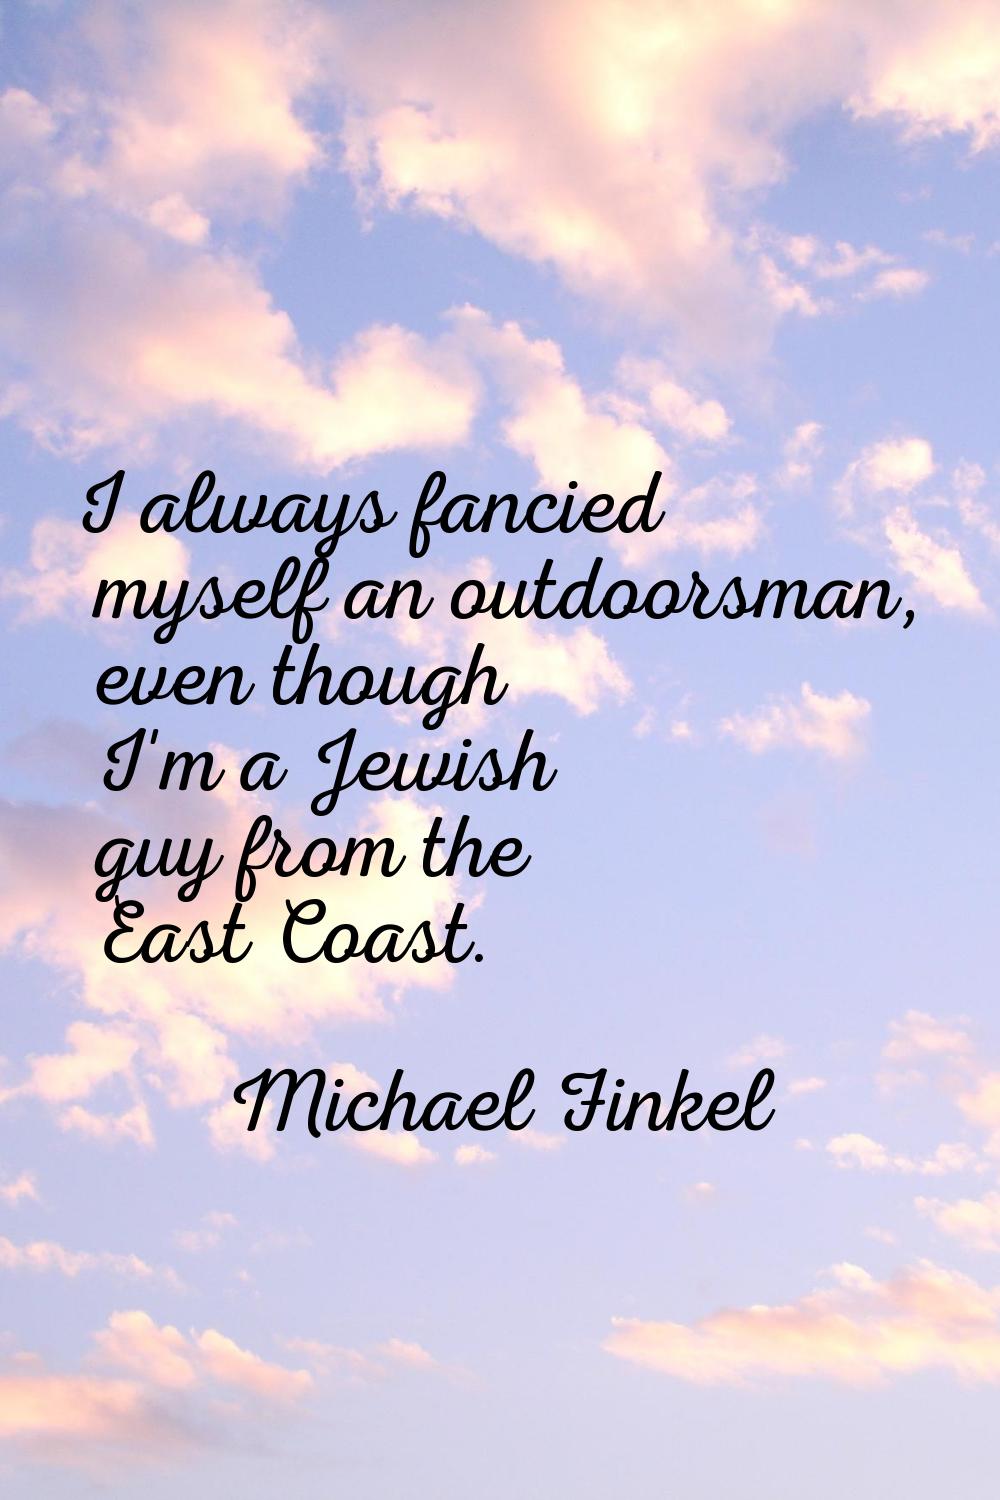 I always fancied myself an outdoorsman, even though I'm a Jewish guy from the East Coast.